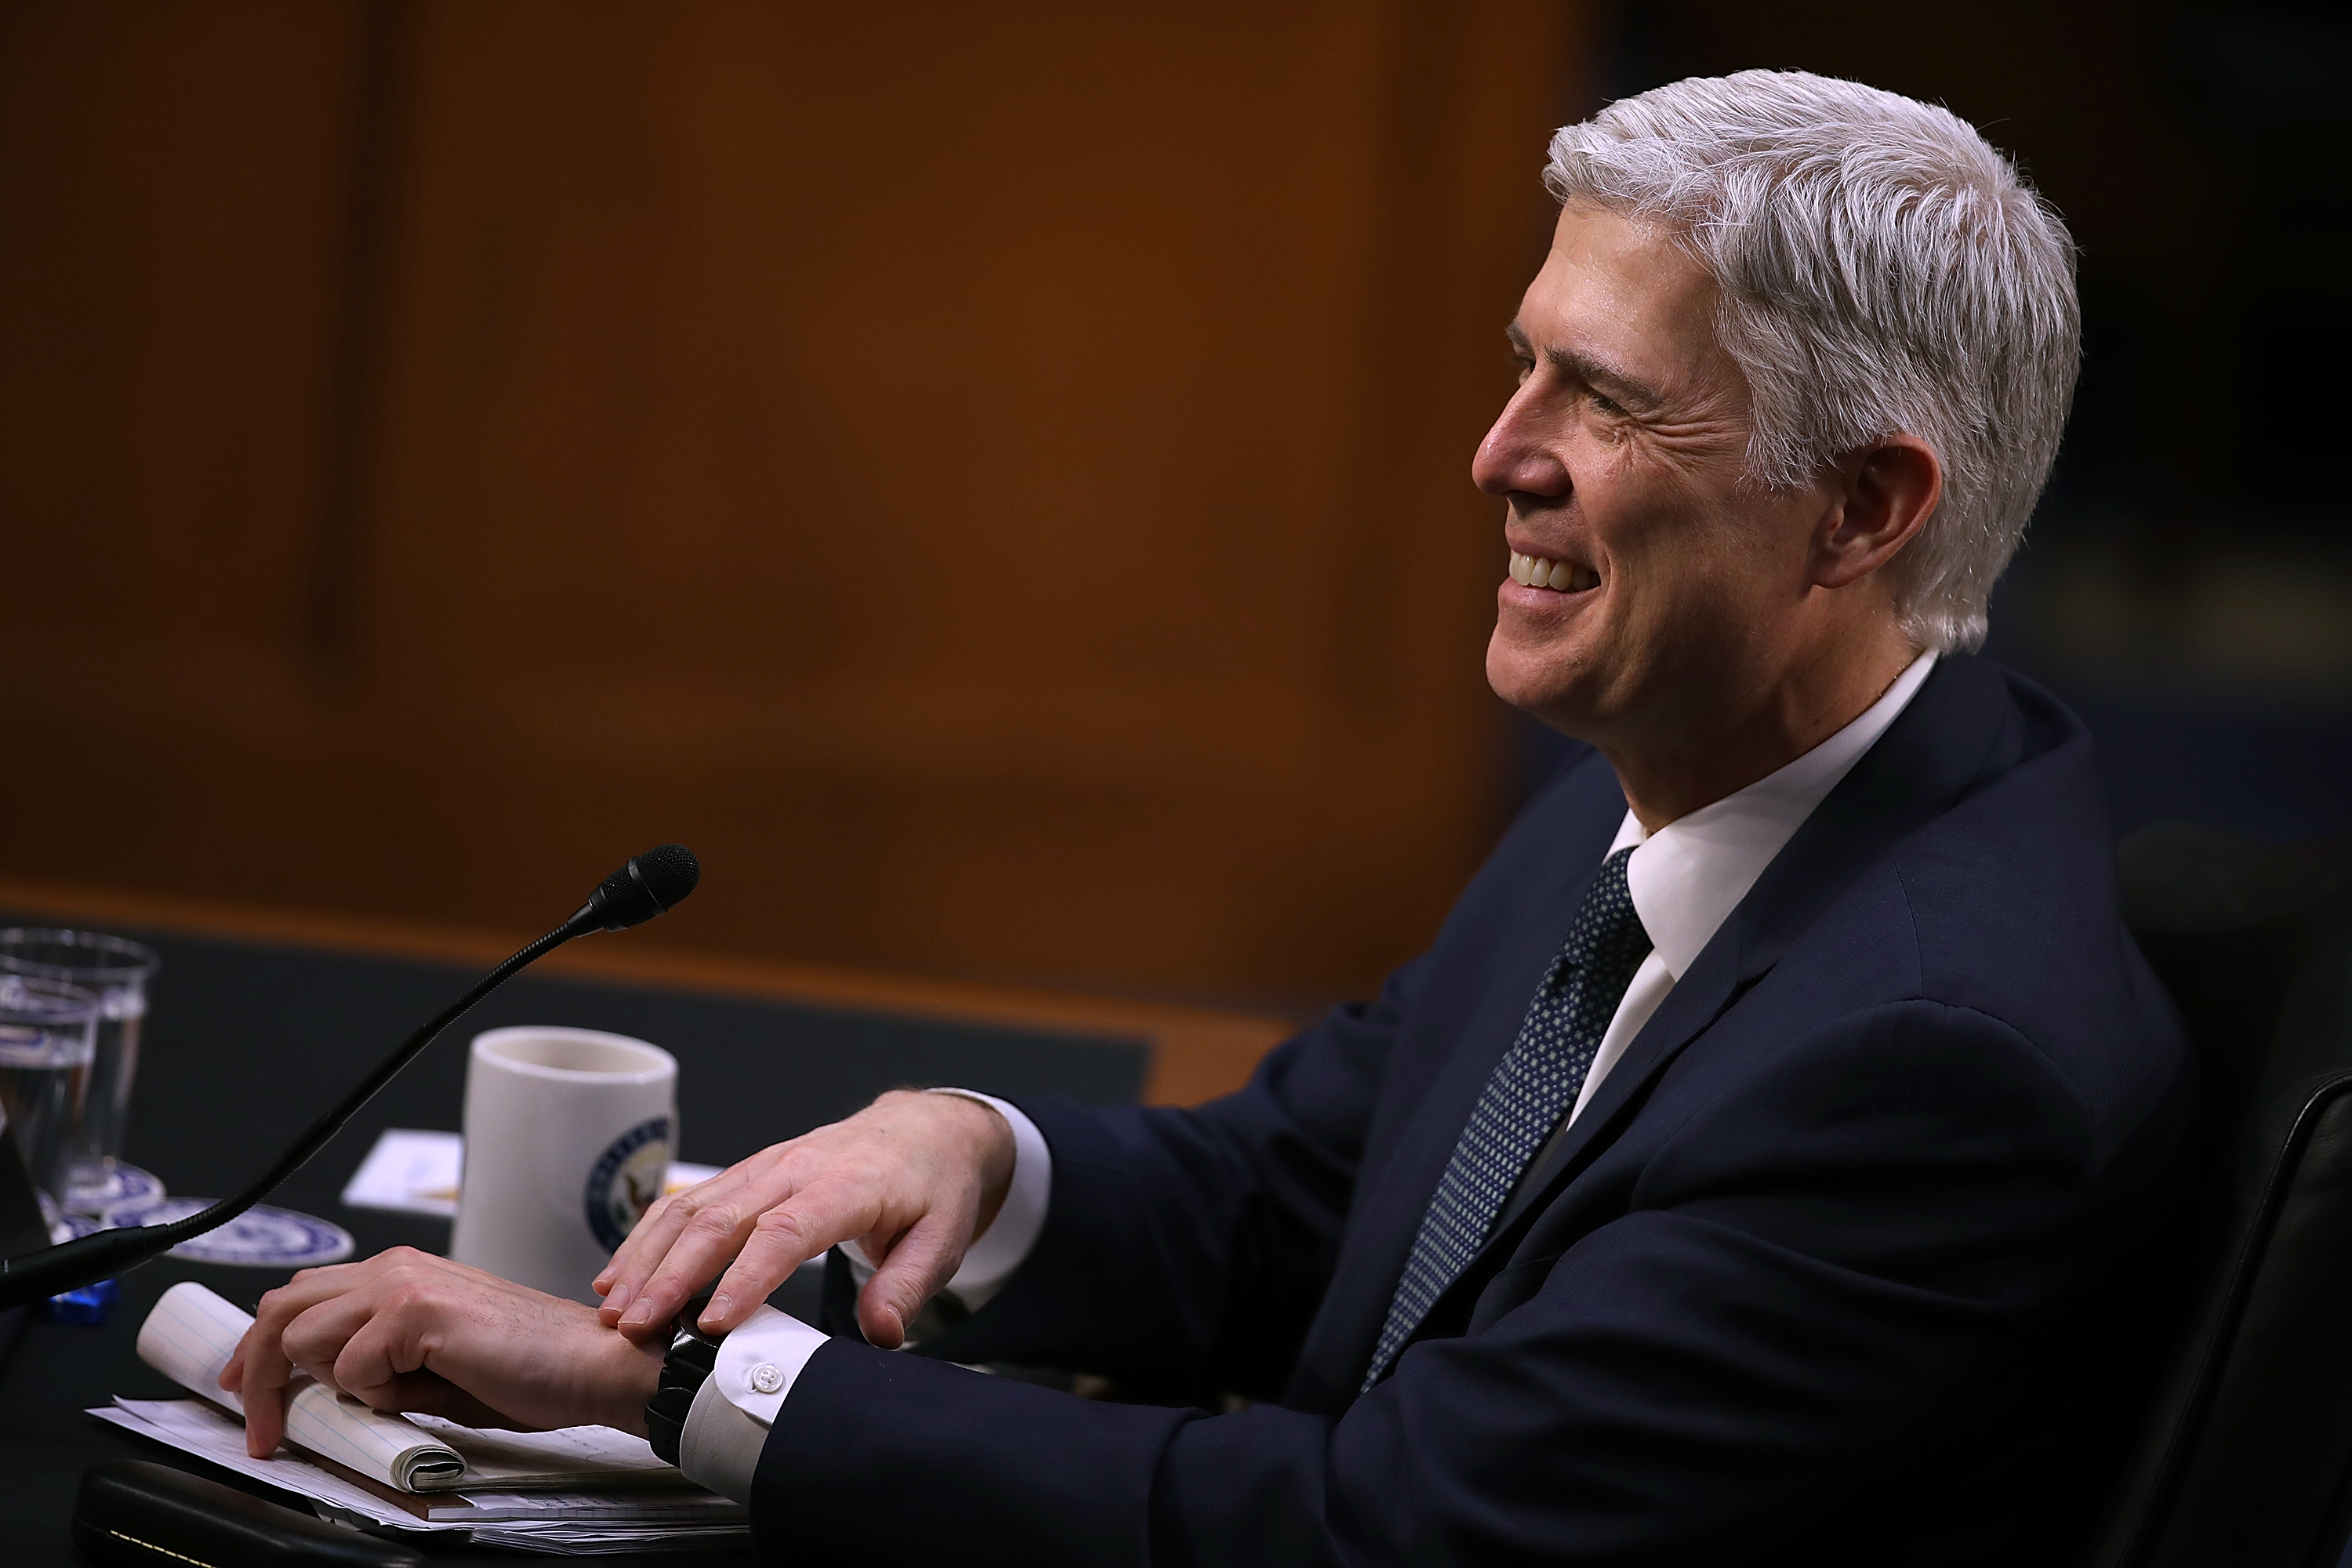 Judge Neil Gorsuch testifies during the third day of his Supreme Court confirmation hearing before the Senate Judiciary Committee in the Hart Senate Office Building on Capitol Hill, March 22, 2017 in Washington. Gorsuch was nominated by President Donald Trump to fill the vacancy left on the court by the February 2016 death of Associate Justice Antonin Scalia.  (Photo by Justin Sullivan/Getty Images) (Justin Sullivan&mdash;Getty Images)